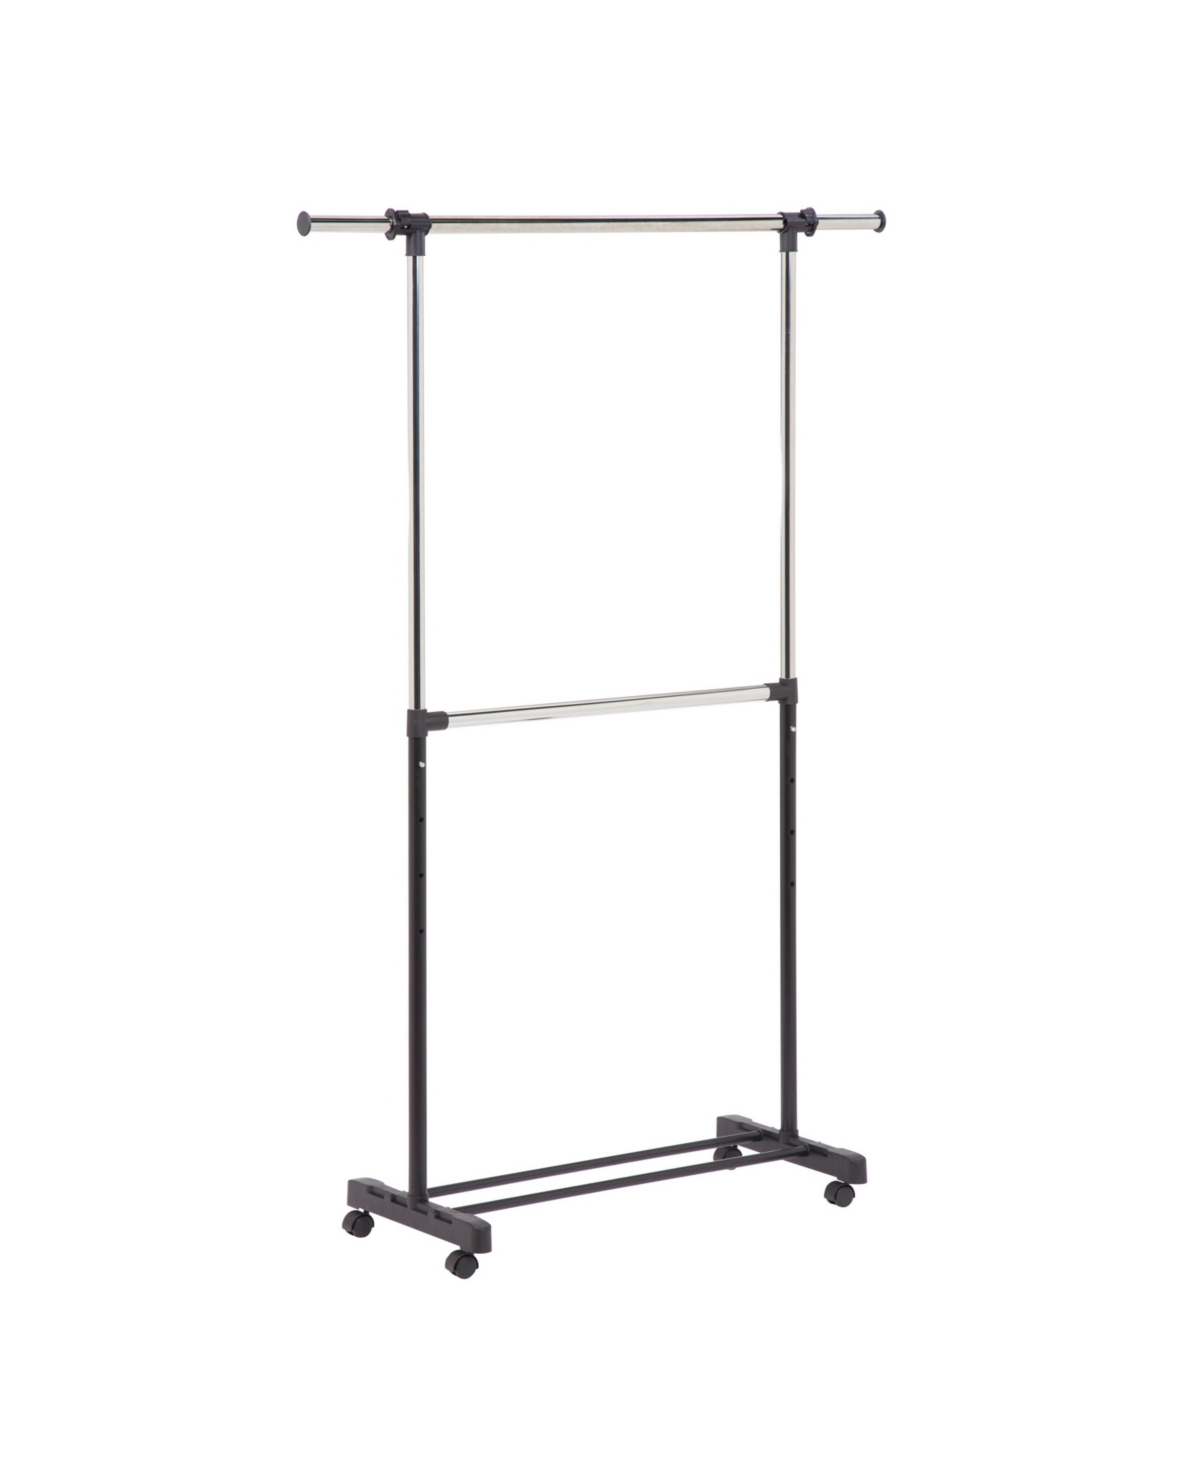 Adjustable Rolling Metal Double Clothes Rack - Chrome